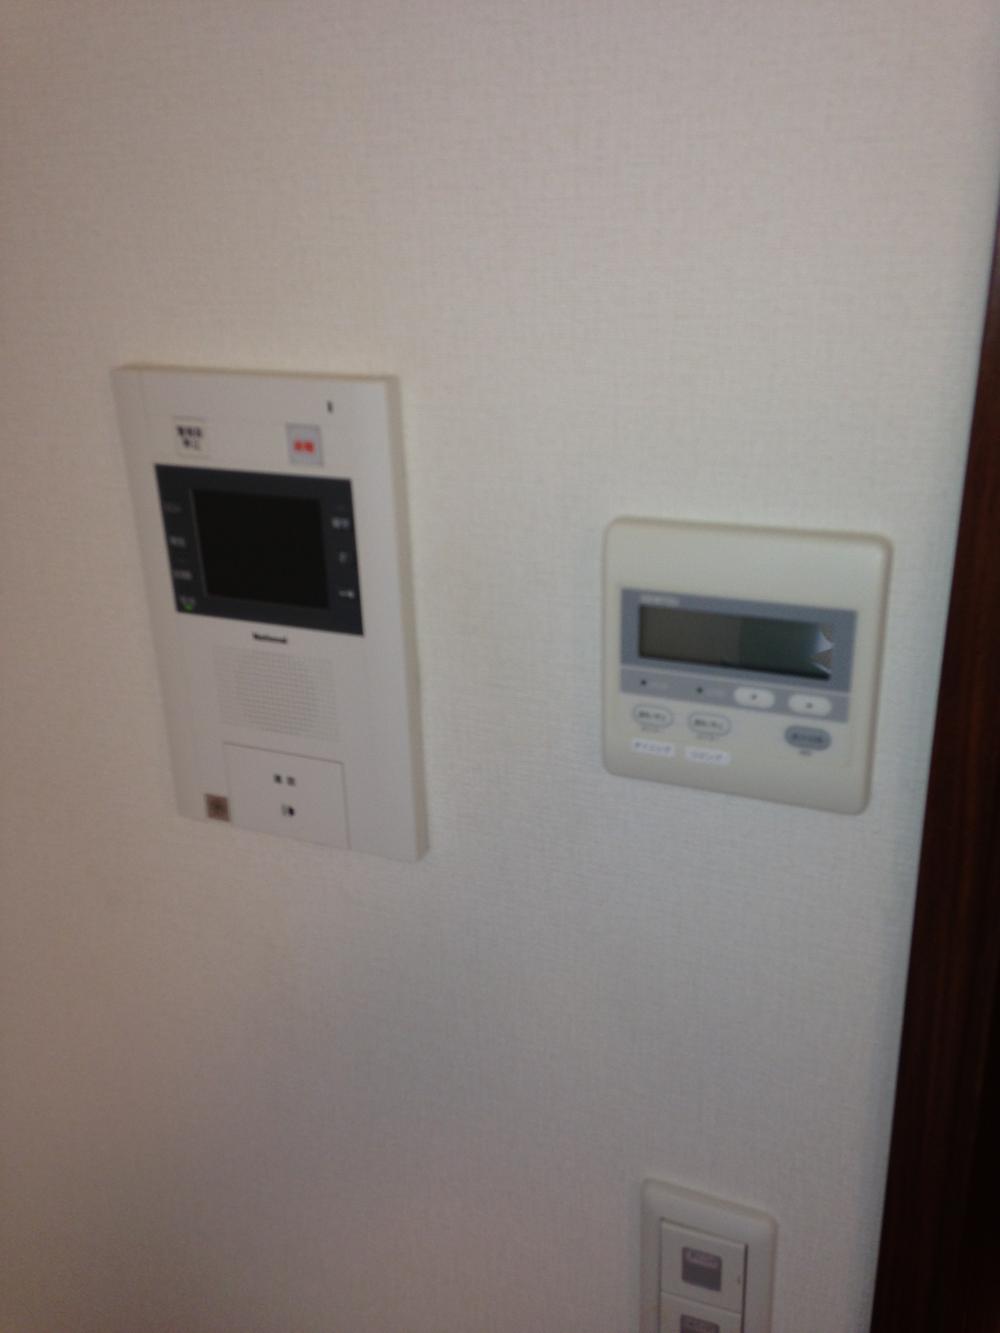 Other. Intercom with a Sekyuritei function   2 is equipped with floor heating system.